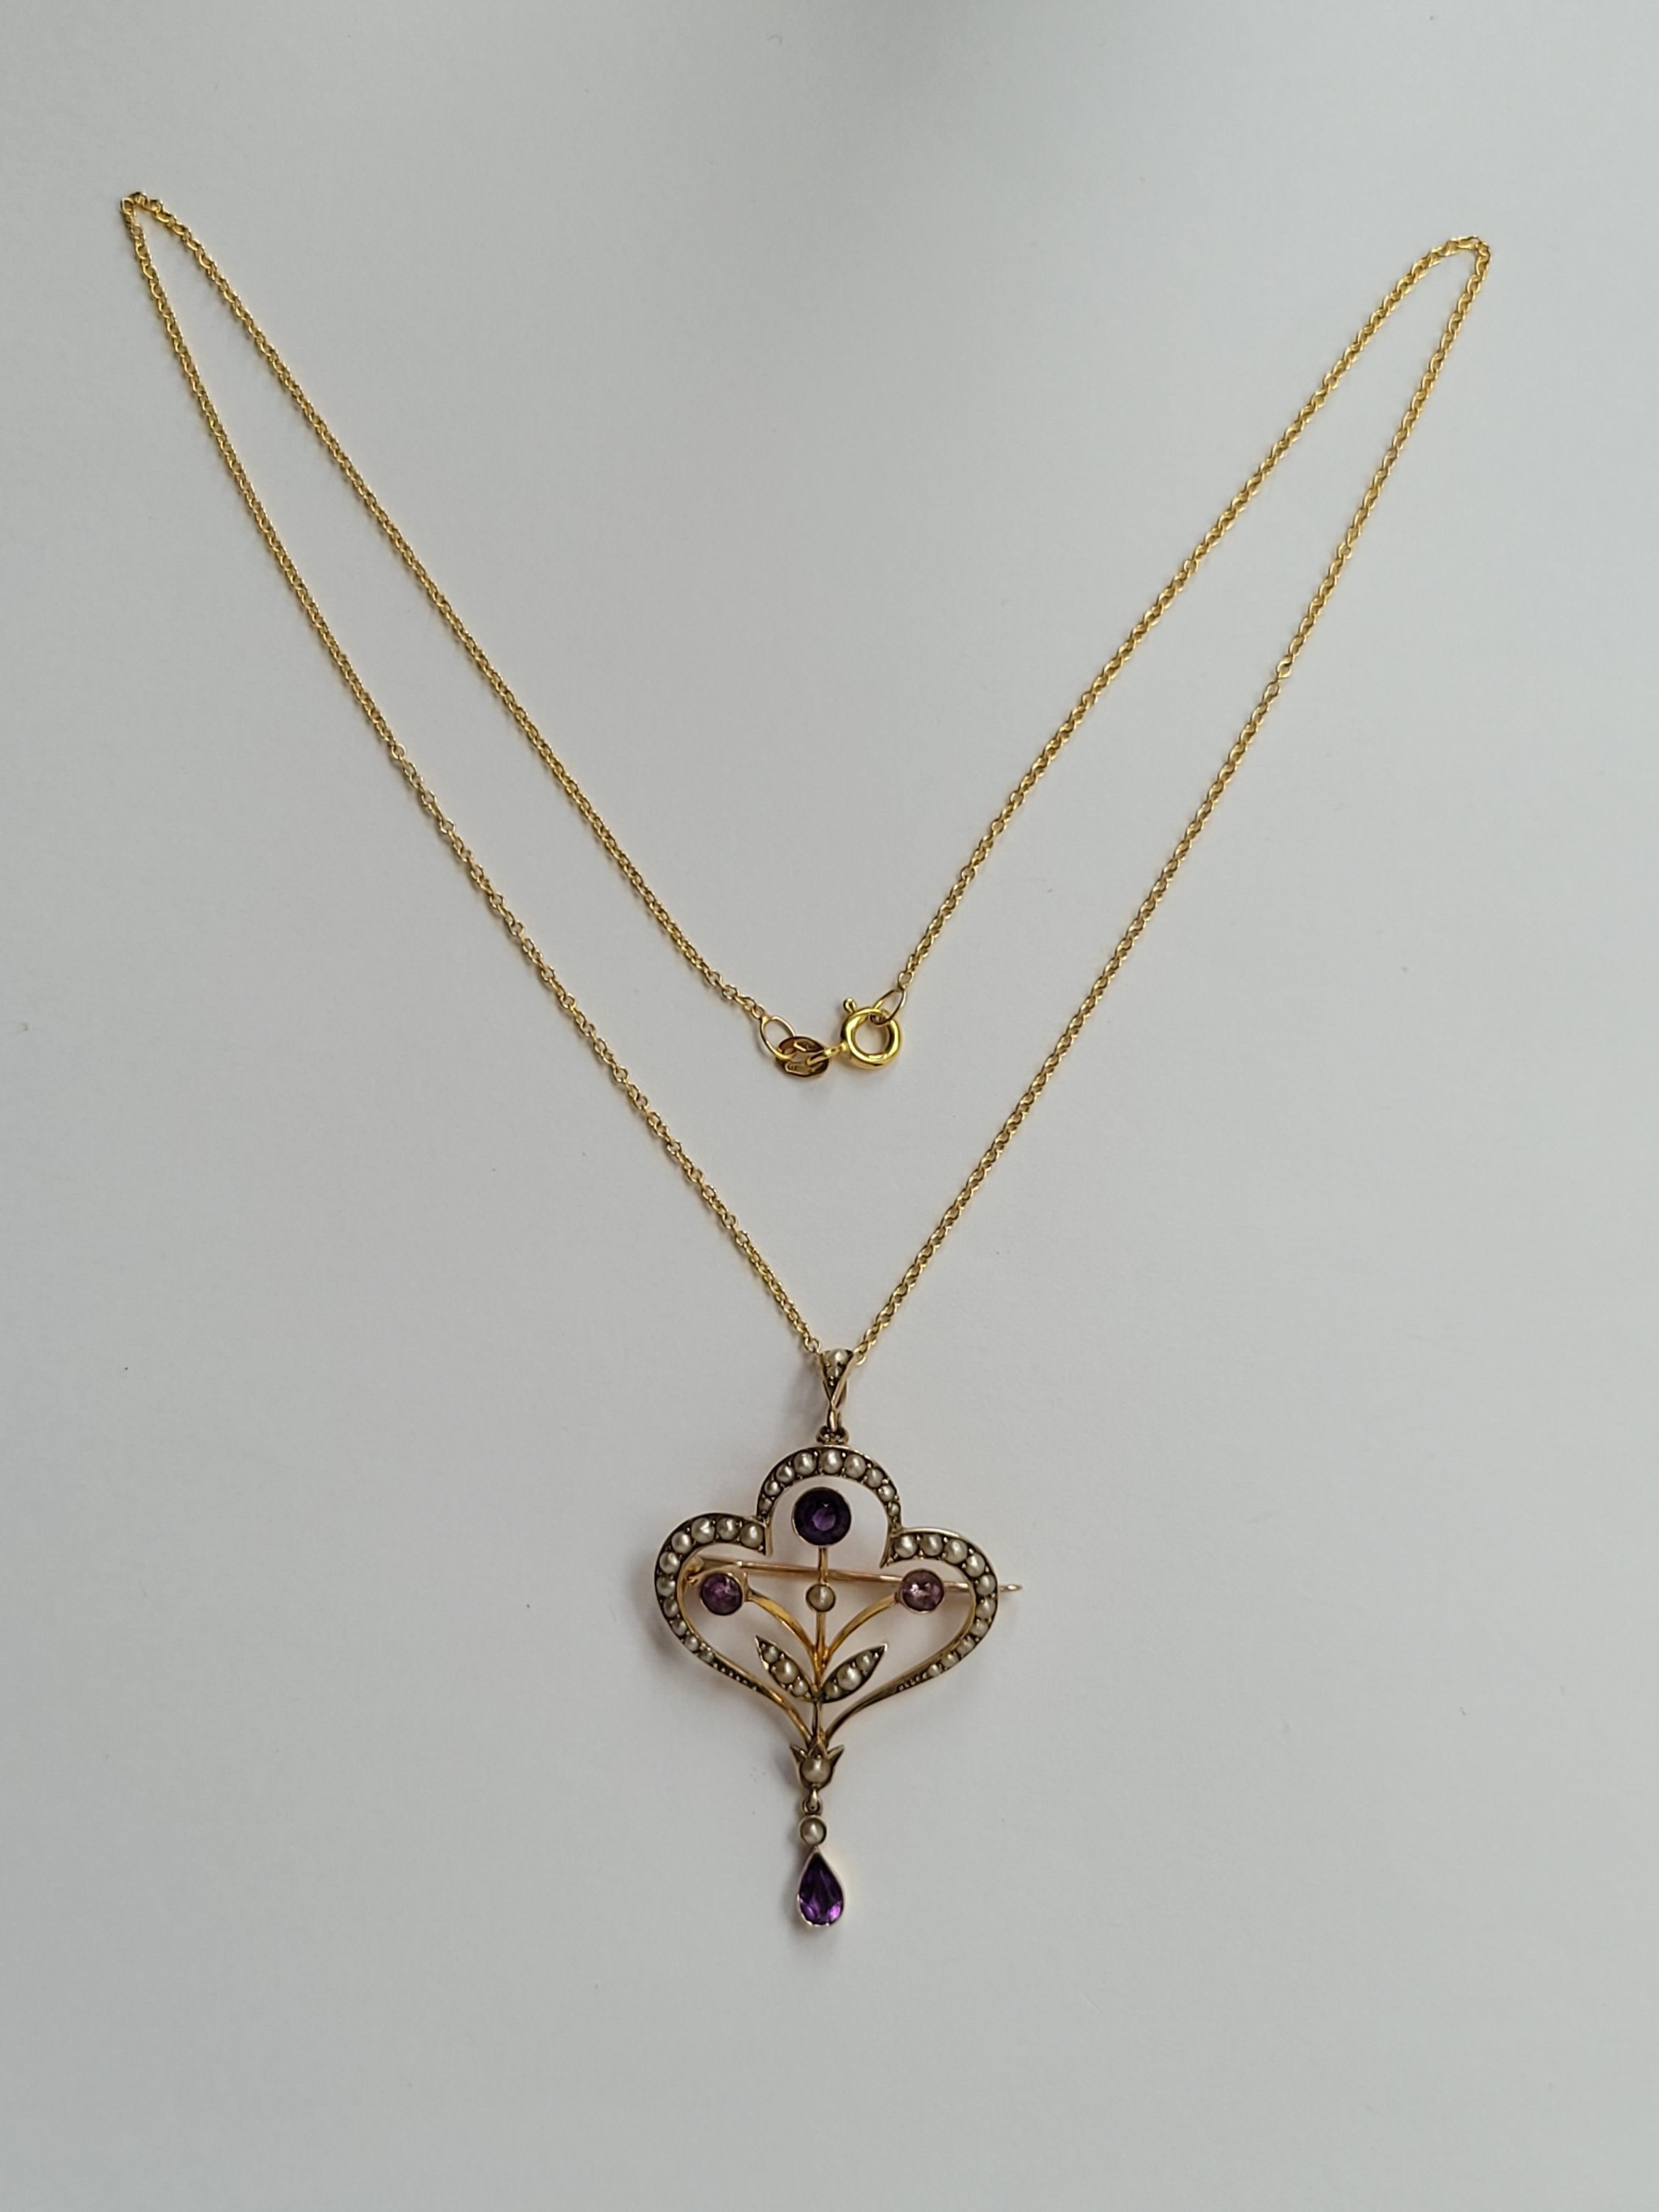 Antique Edwardian Amethyst Pearl Gold Brooch Pendant Necklace For Sale 5